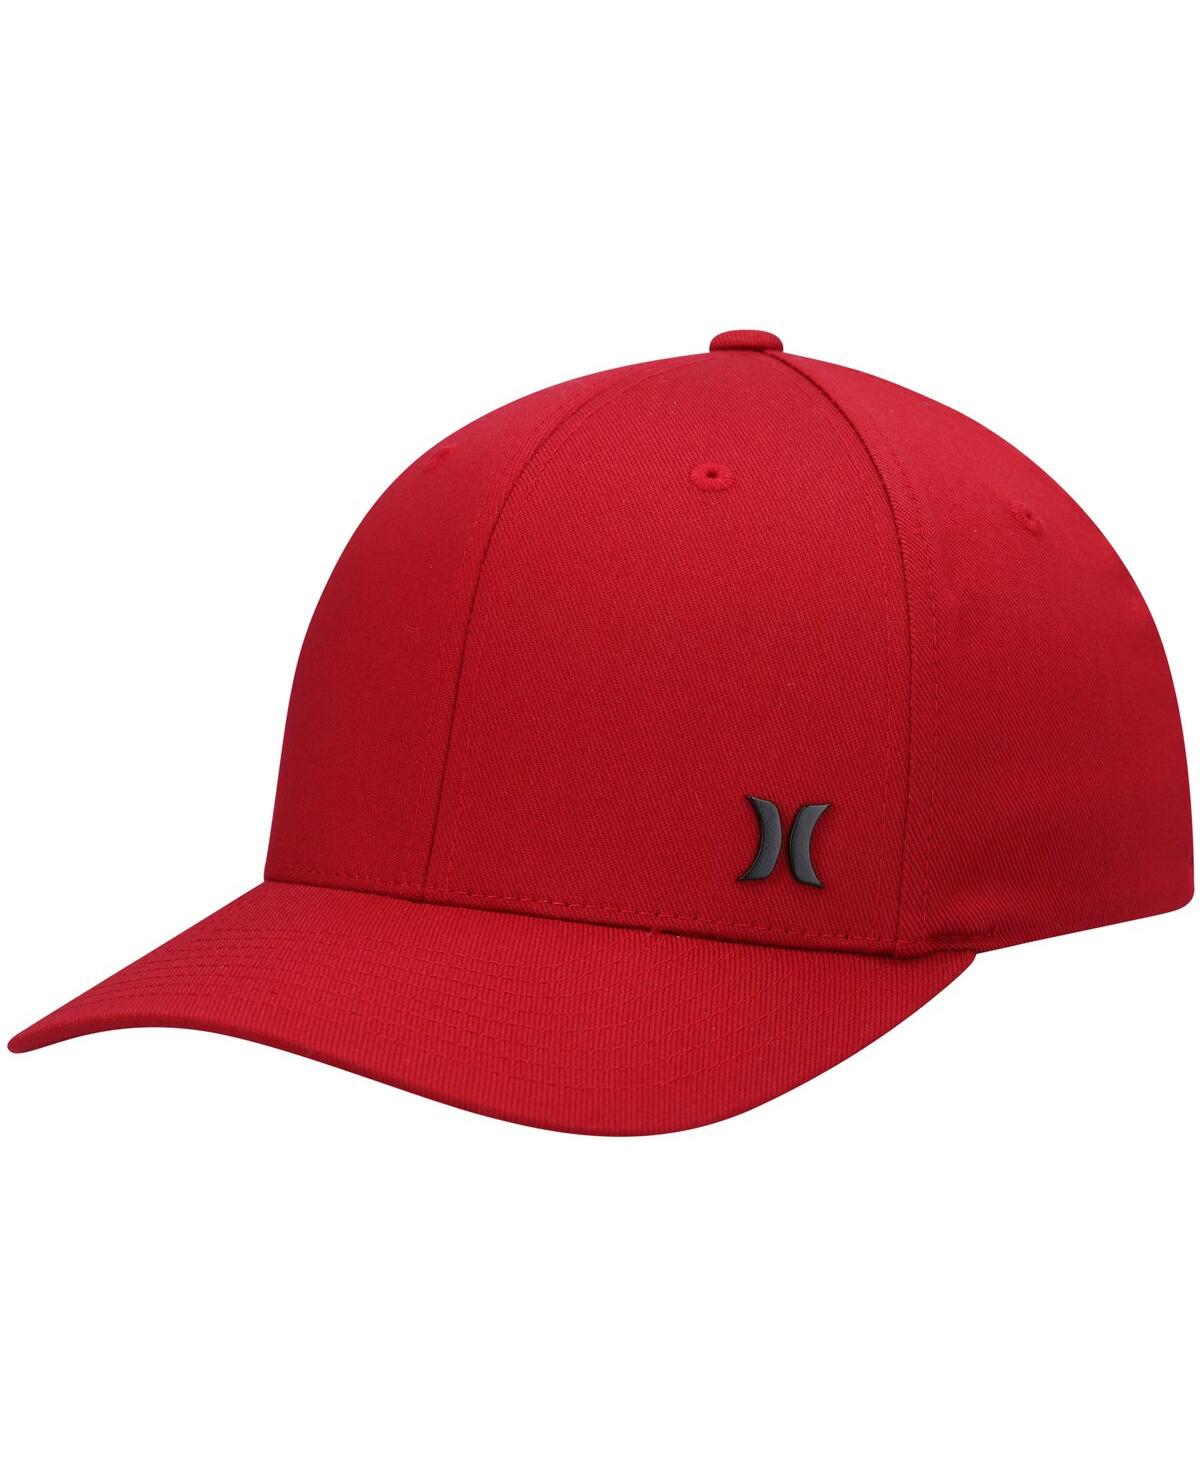 Men's Hurley Red Iron Corp Flex Hat - Red